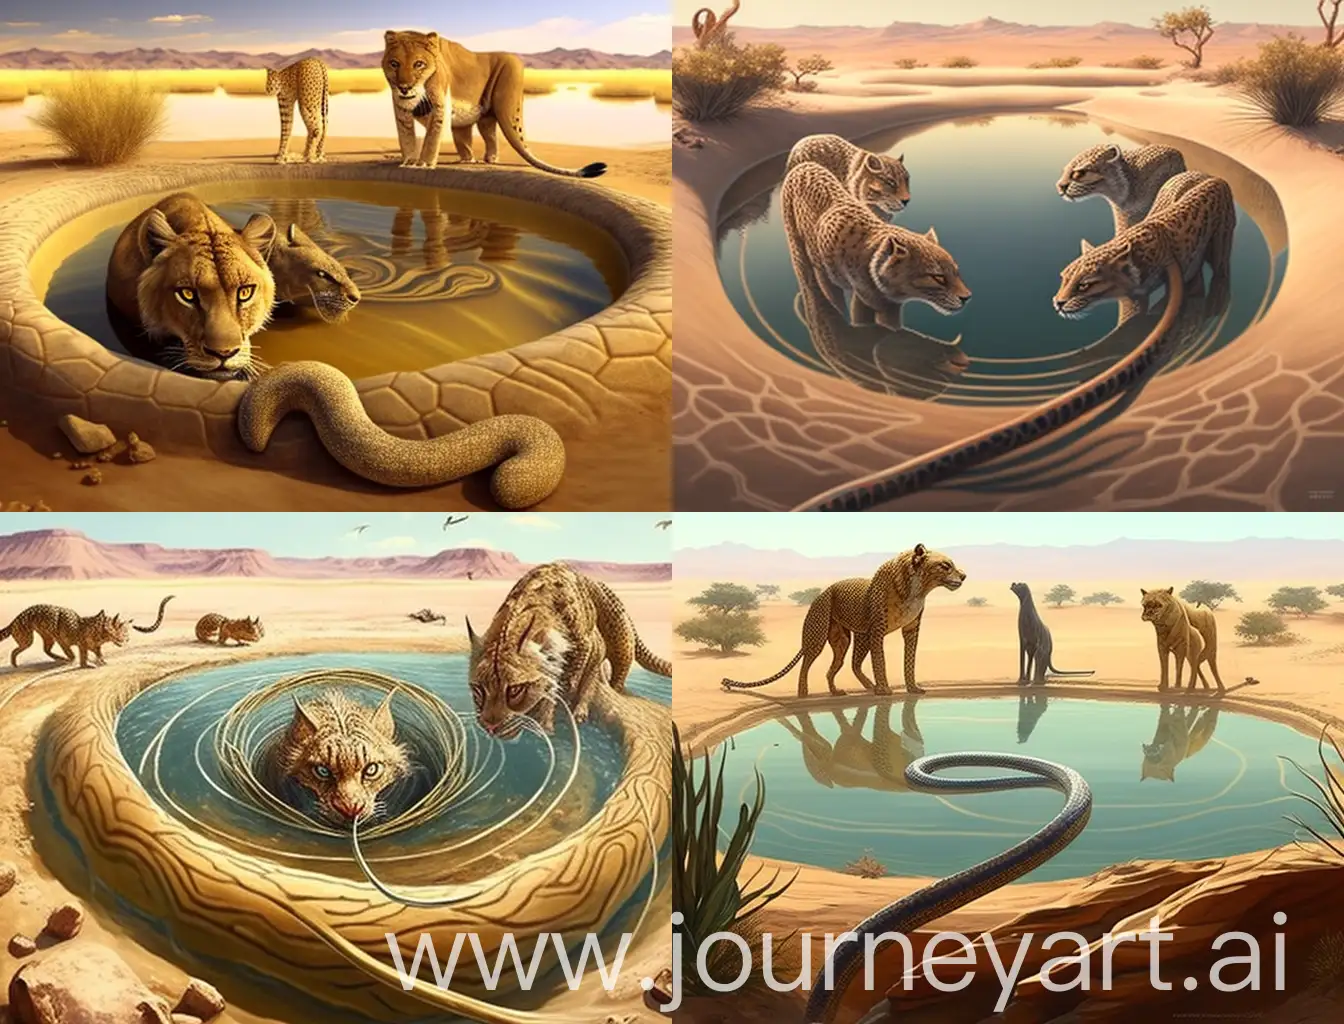 "Snake, lion, jackal set off for water in desert. Encourage each other, find small pool. Describe their journey and teamwork."